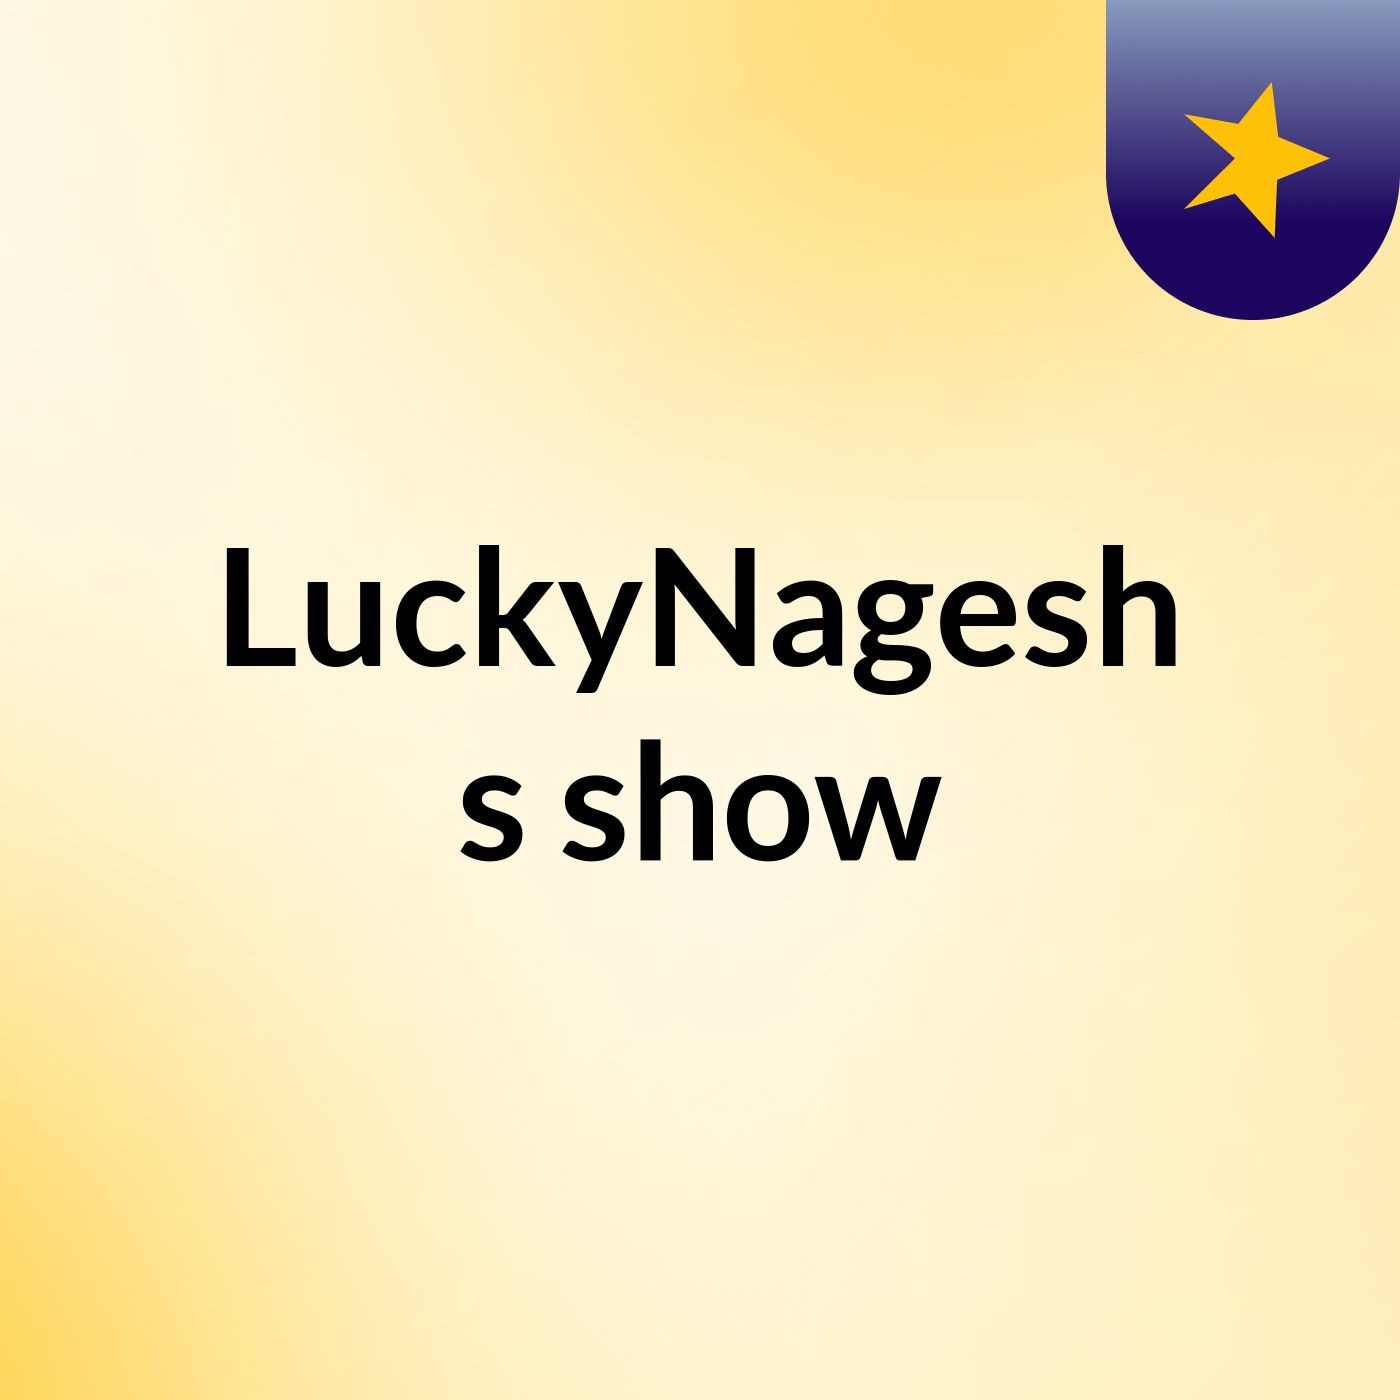 LuckyNagesh's show